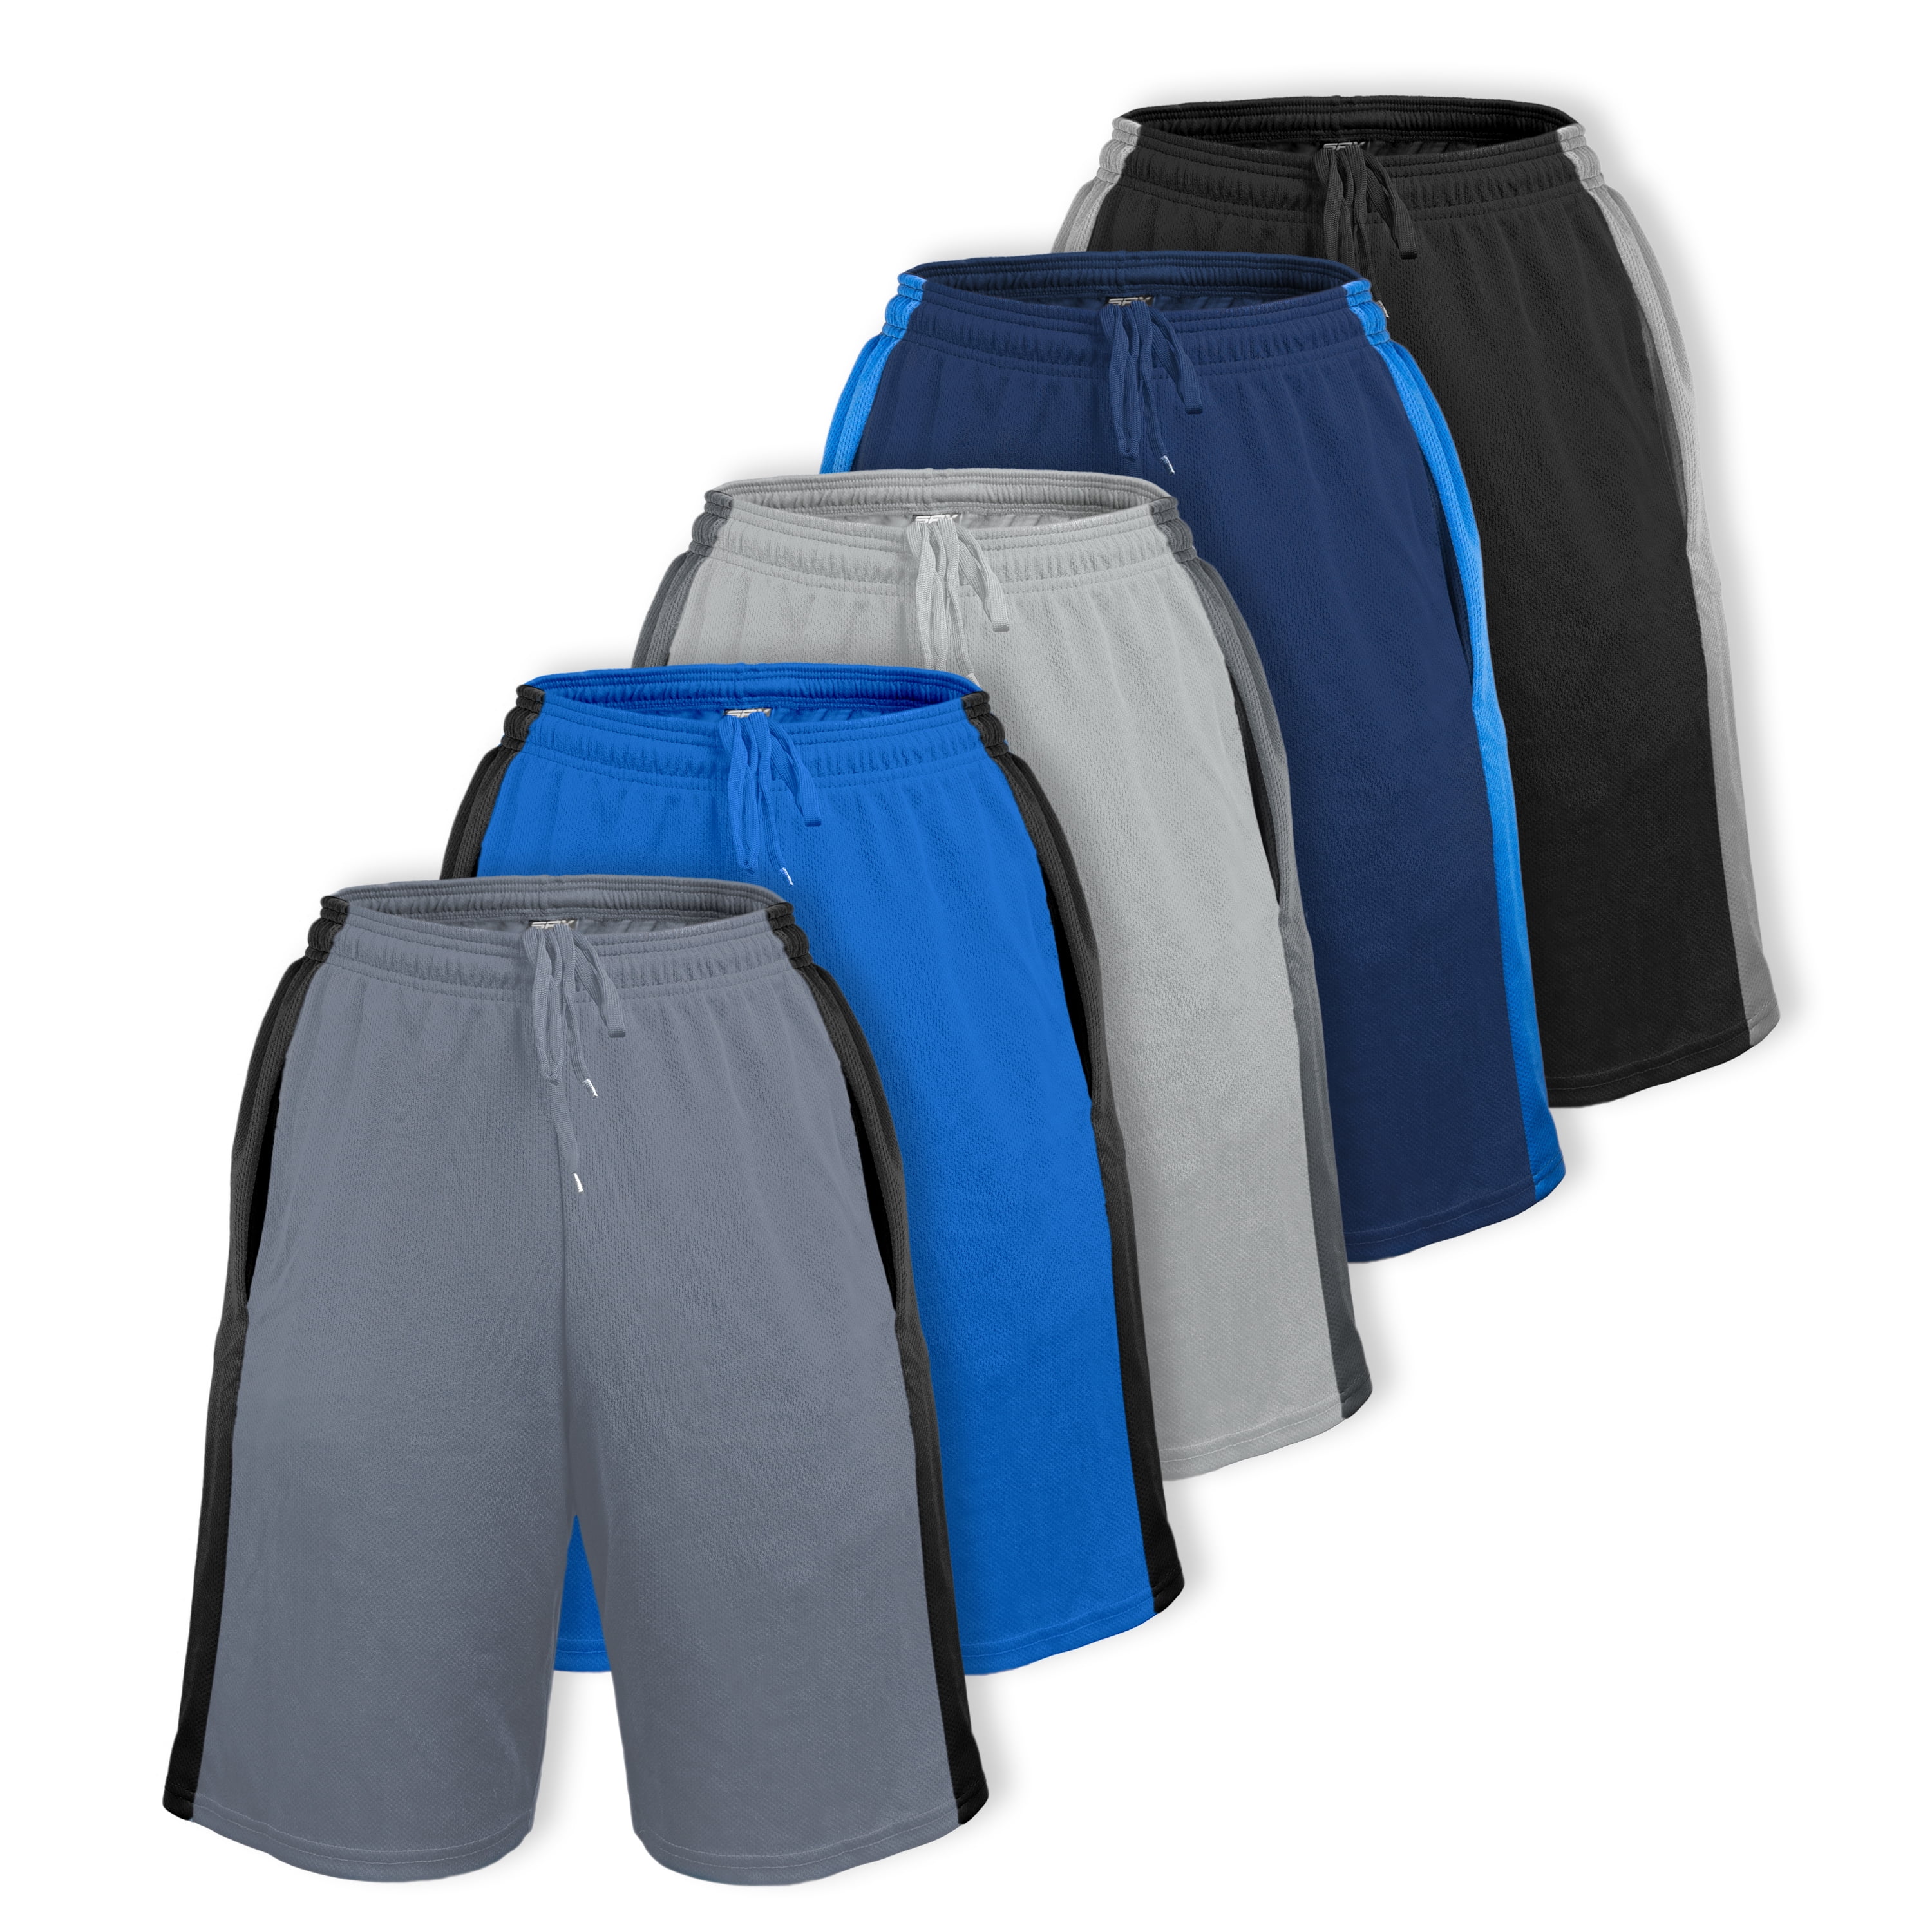 Mens Premium Active Athletic Performance Shorts with Pockets 5 Pack